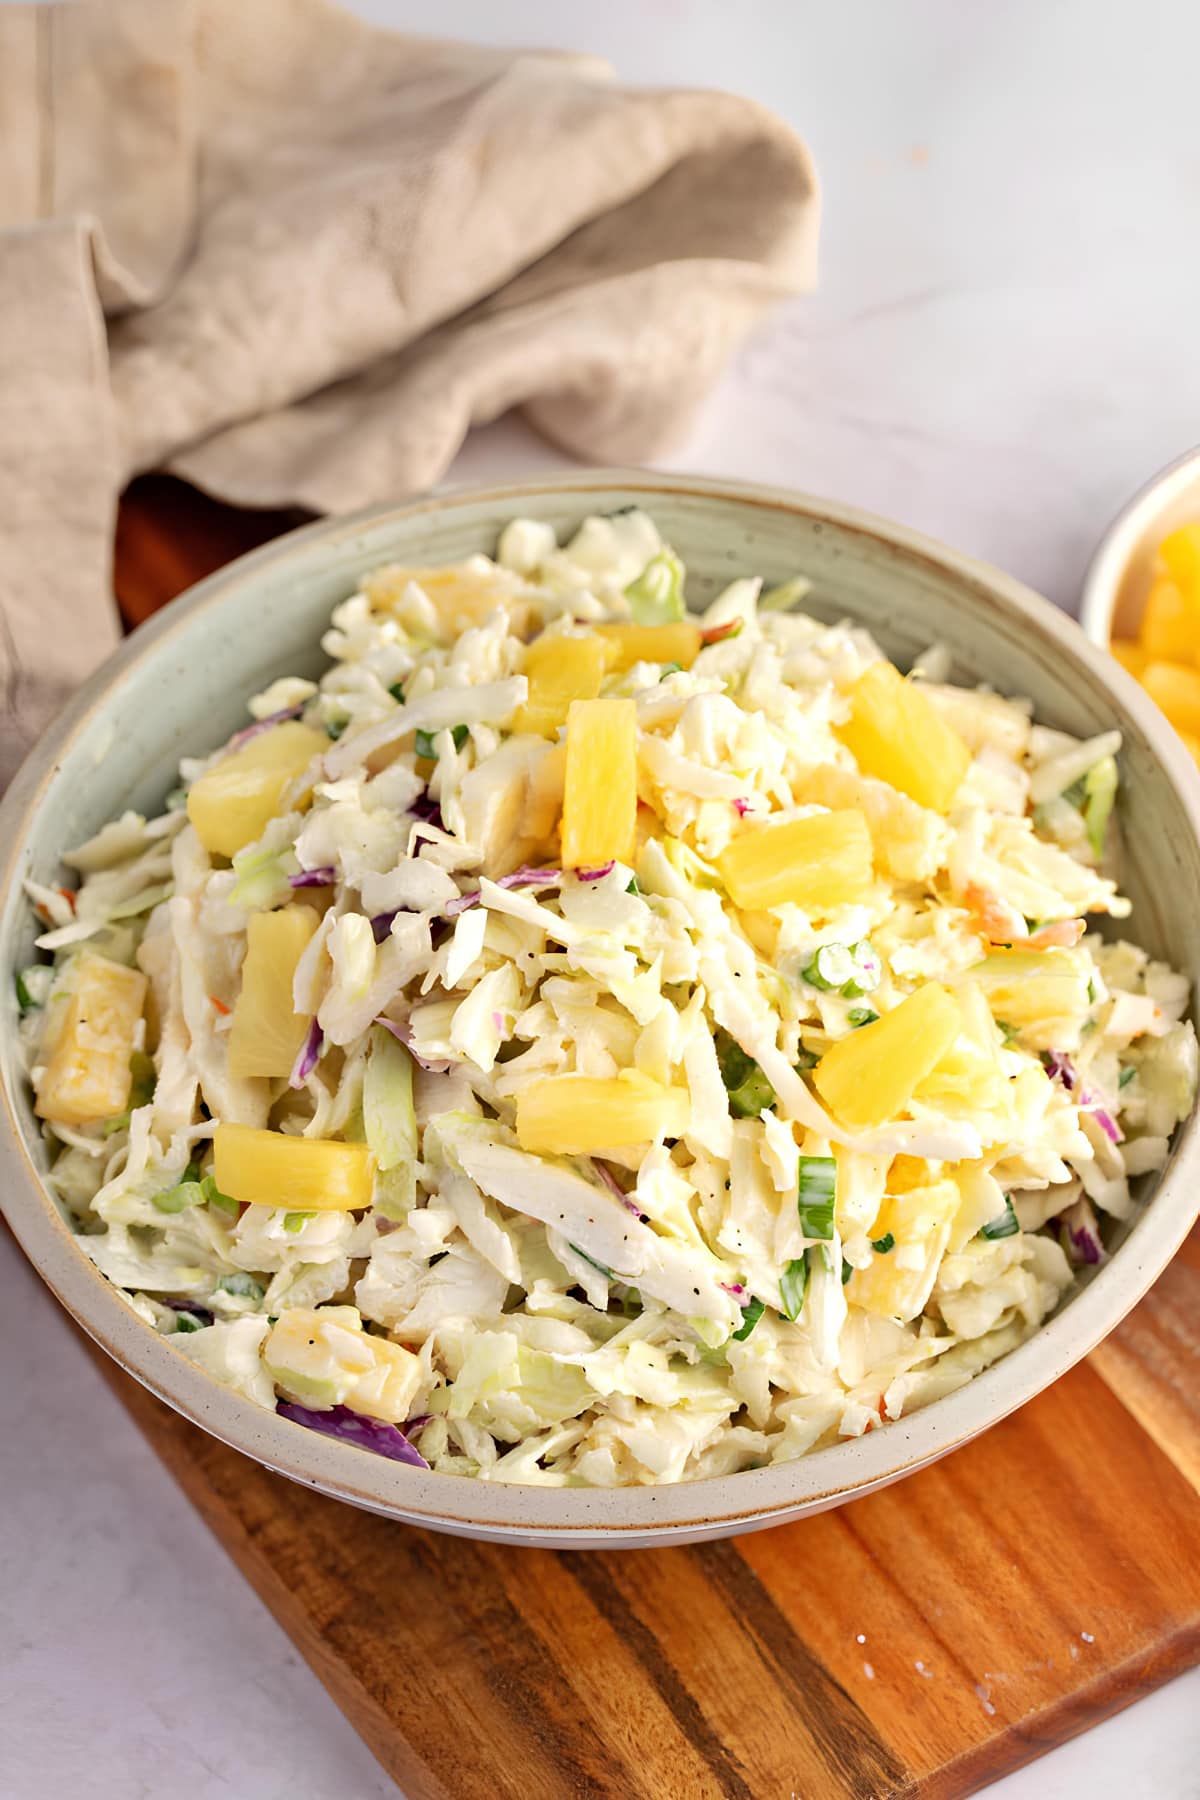 A Bowl of Coleslaw with Pineapple on a Wooden Cutting Board